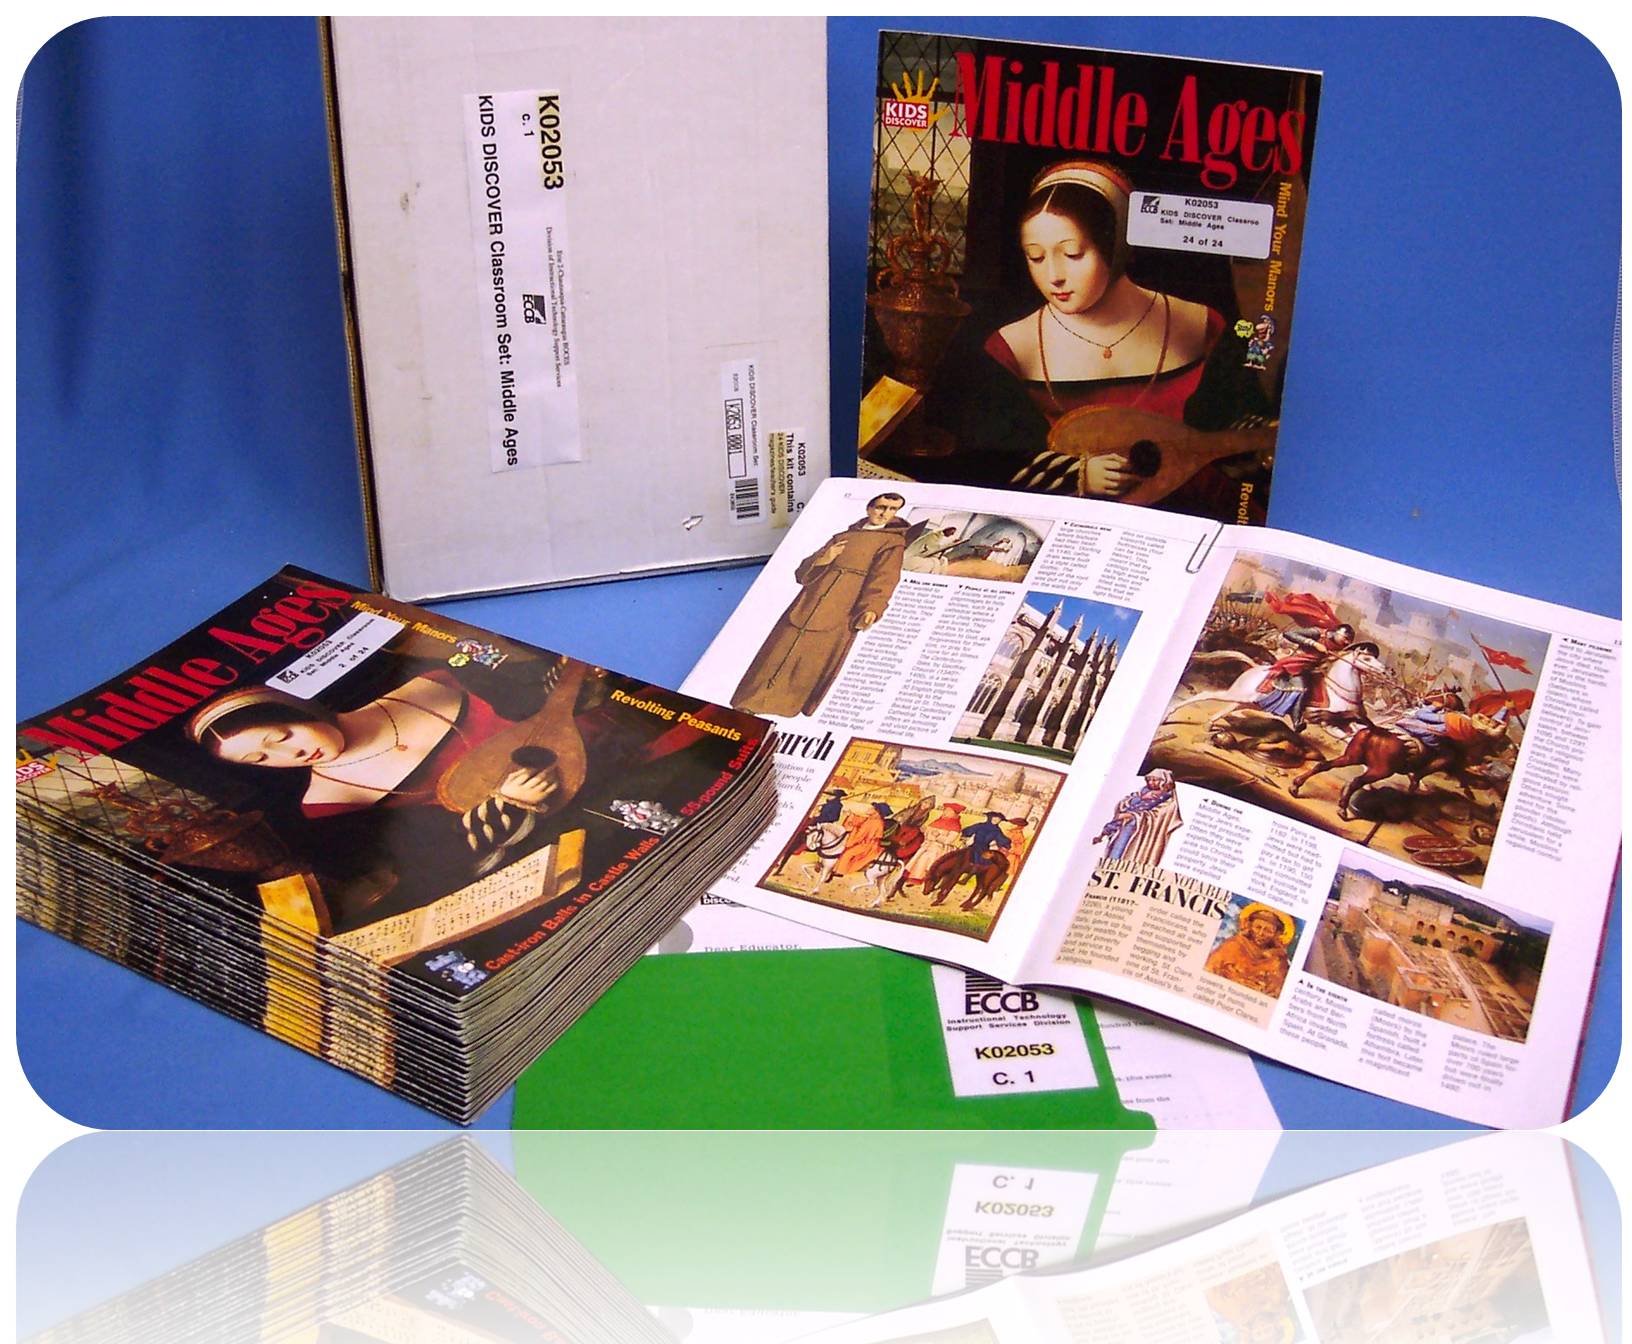 KIDS DISCOVER Classroom Set: Middle Ages